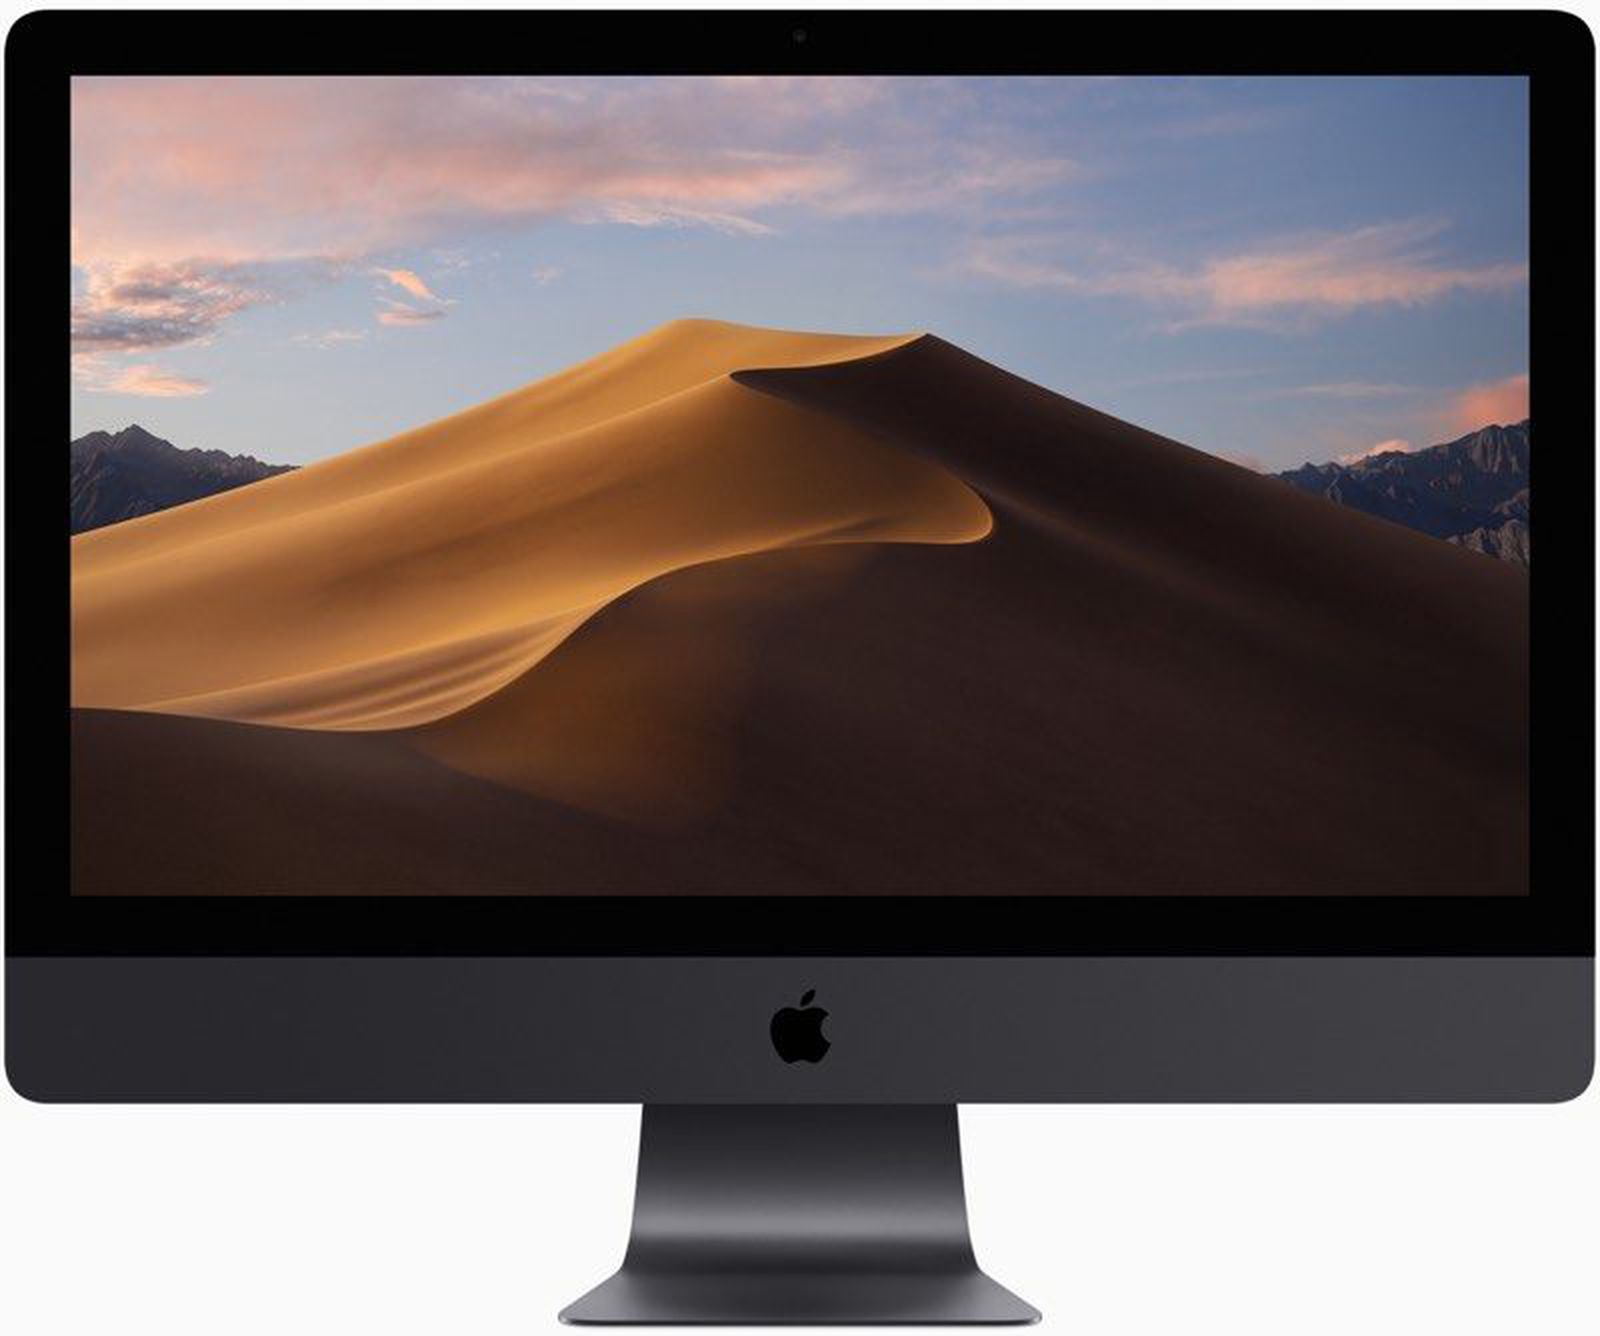 macos sierra review for a late 2012 mac